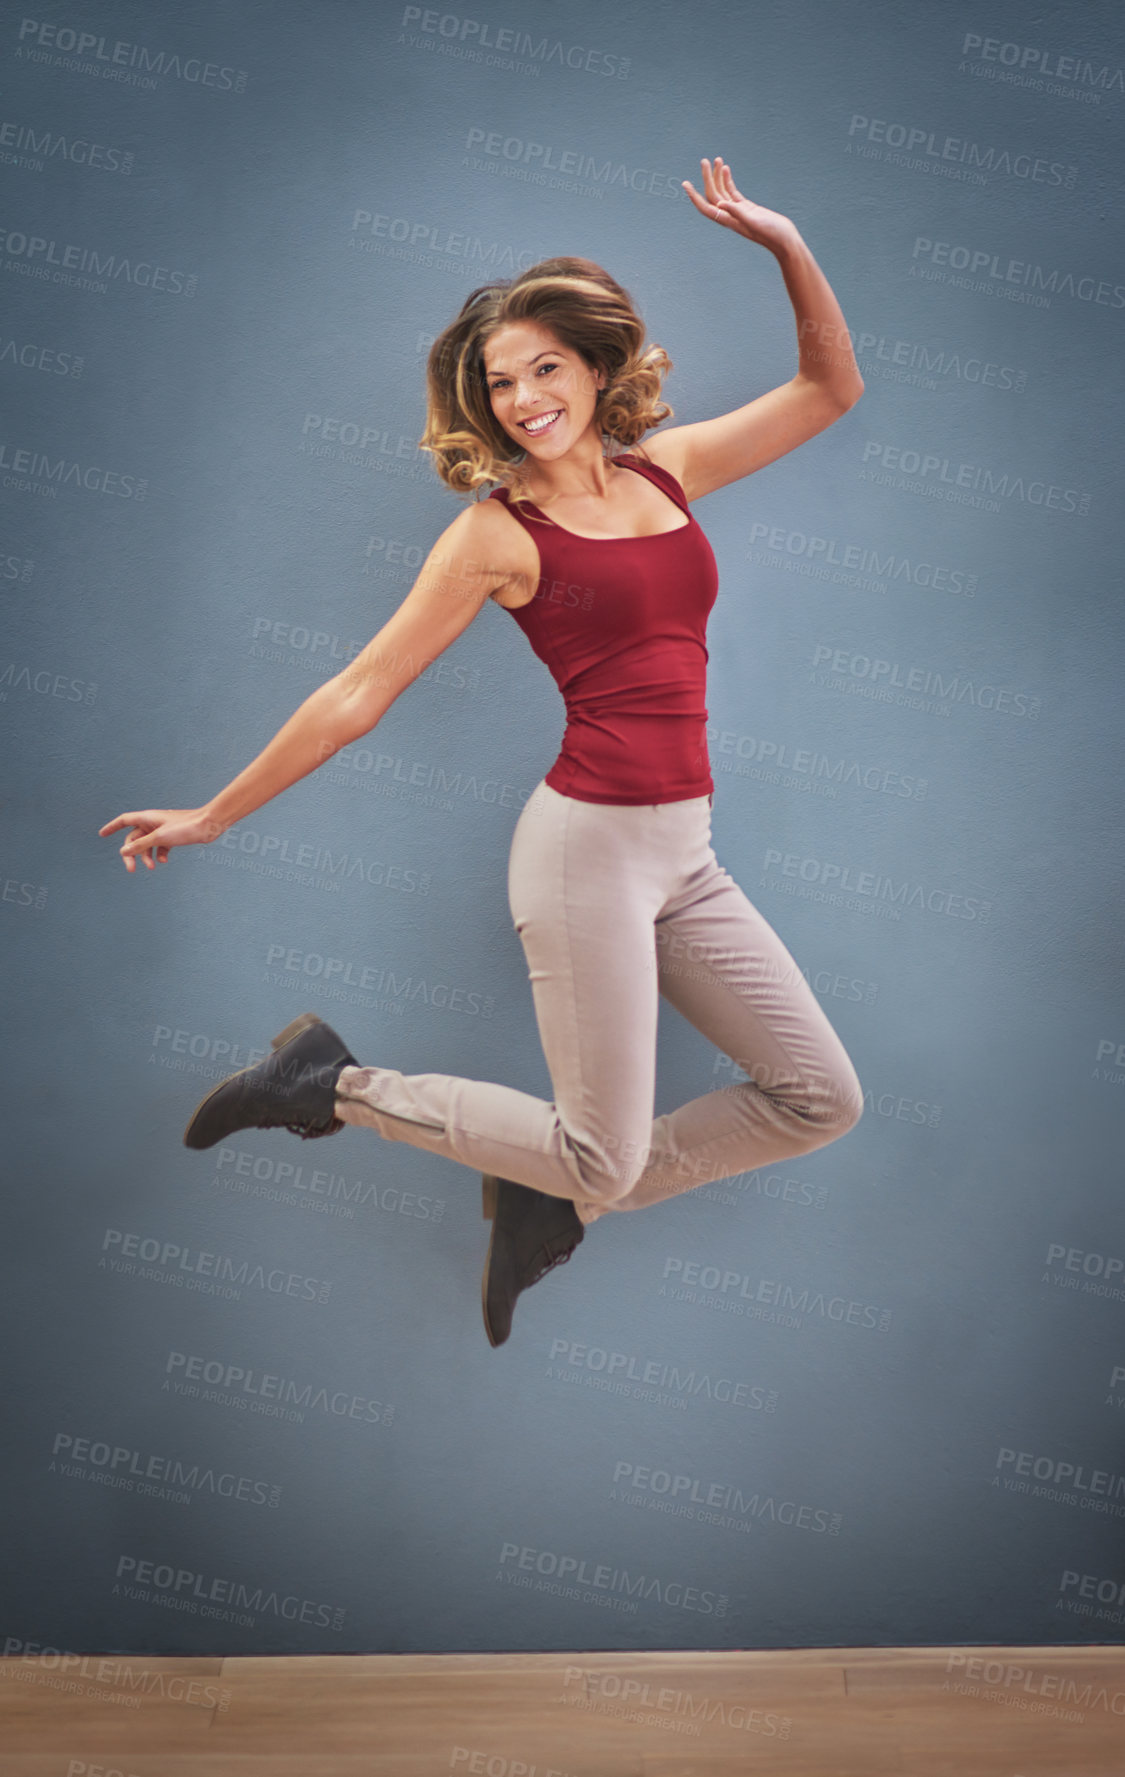 Buy stock photo Shot of a happy young woman jumping in the air against a gray background